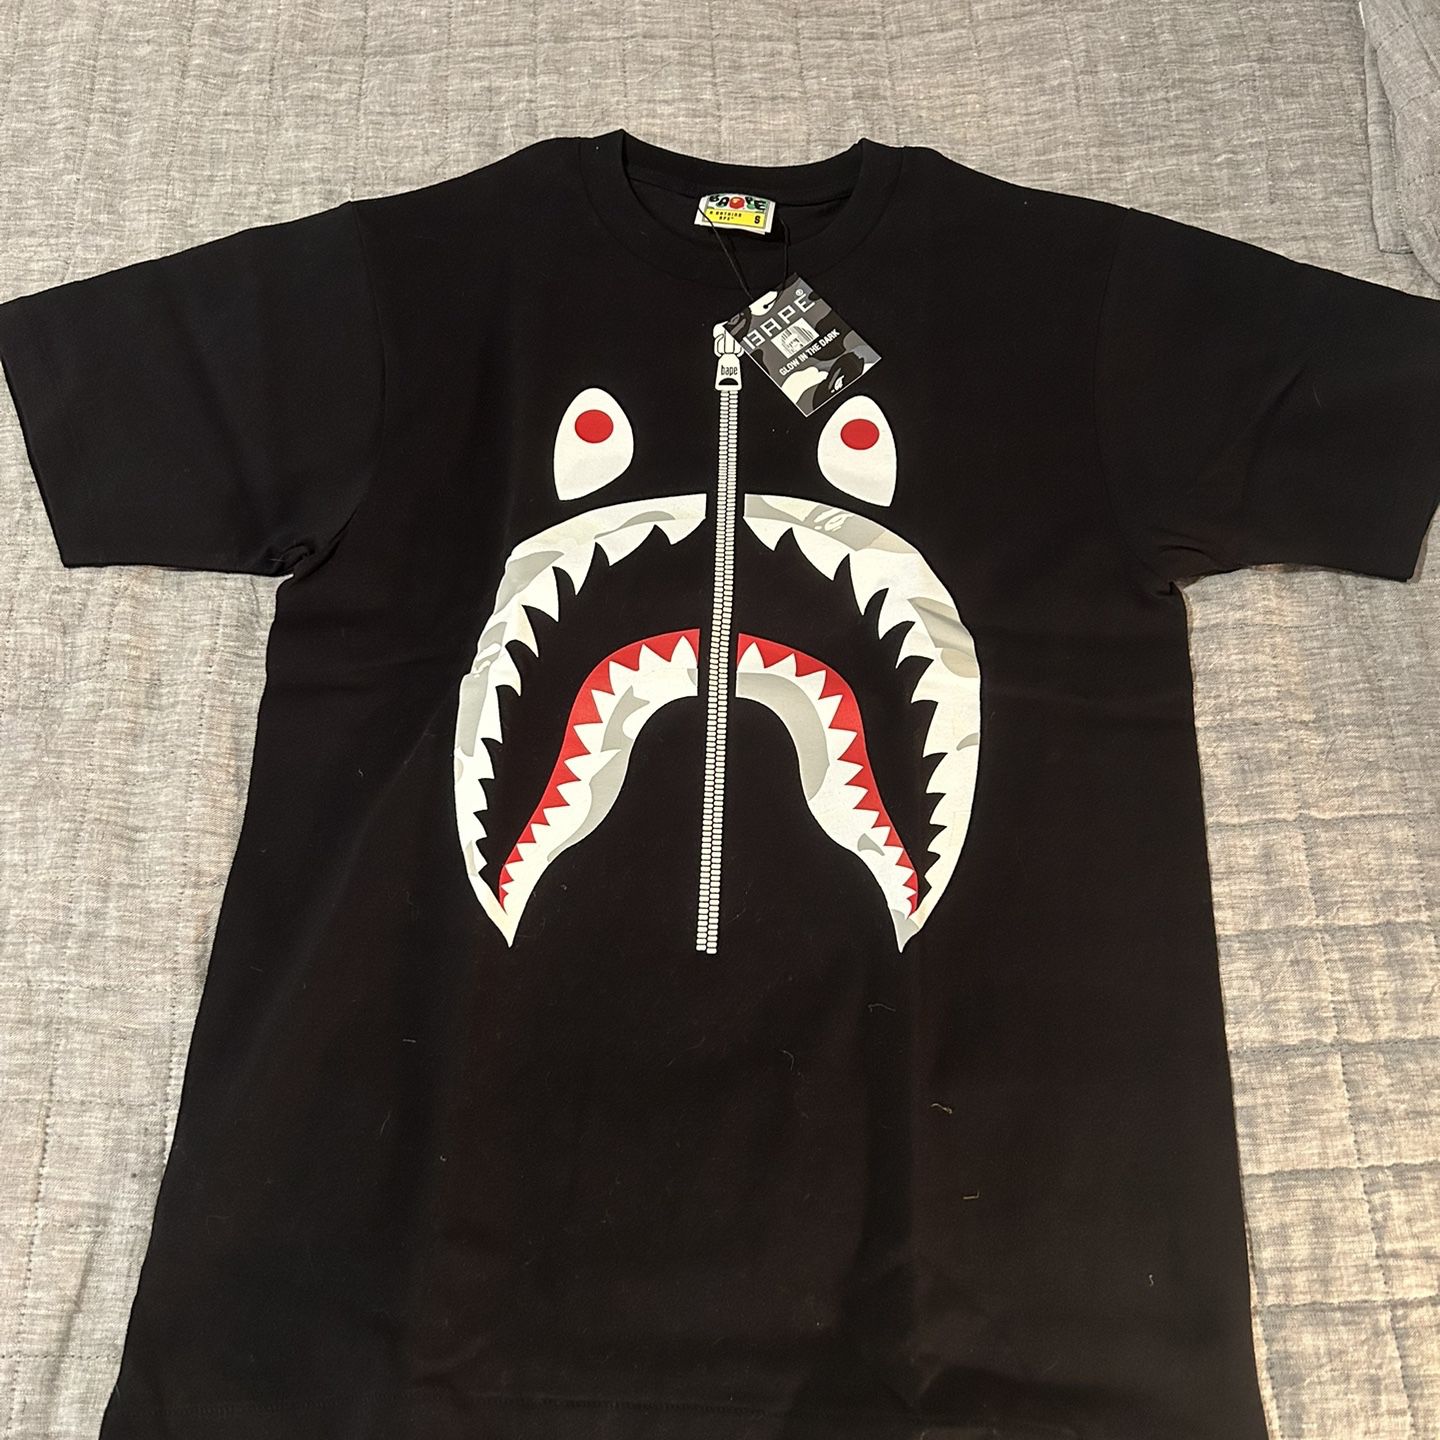 Bape black shark t shirt glow in the dark size S new never worn Ships Same Day Or Next Day 